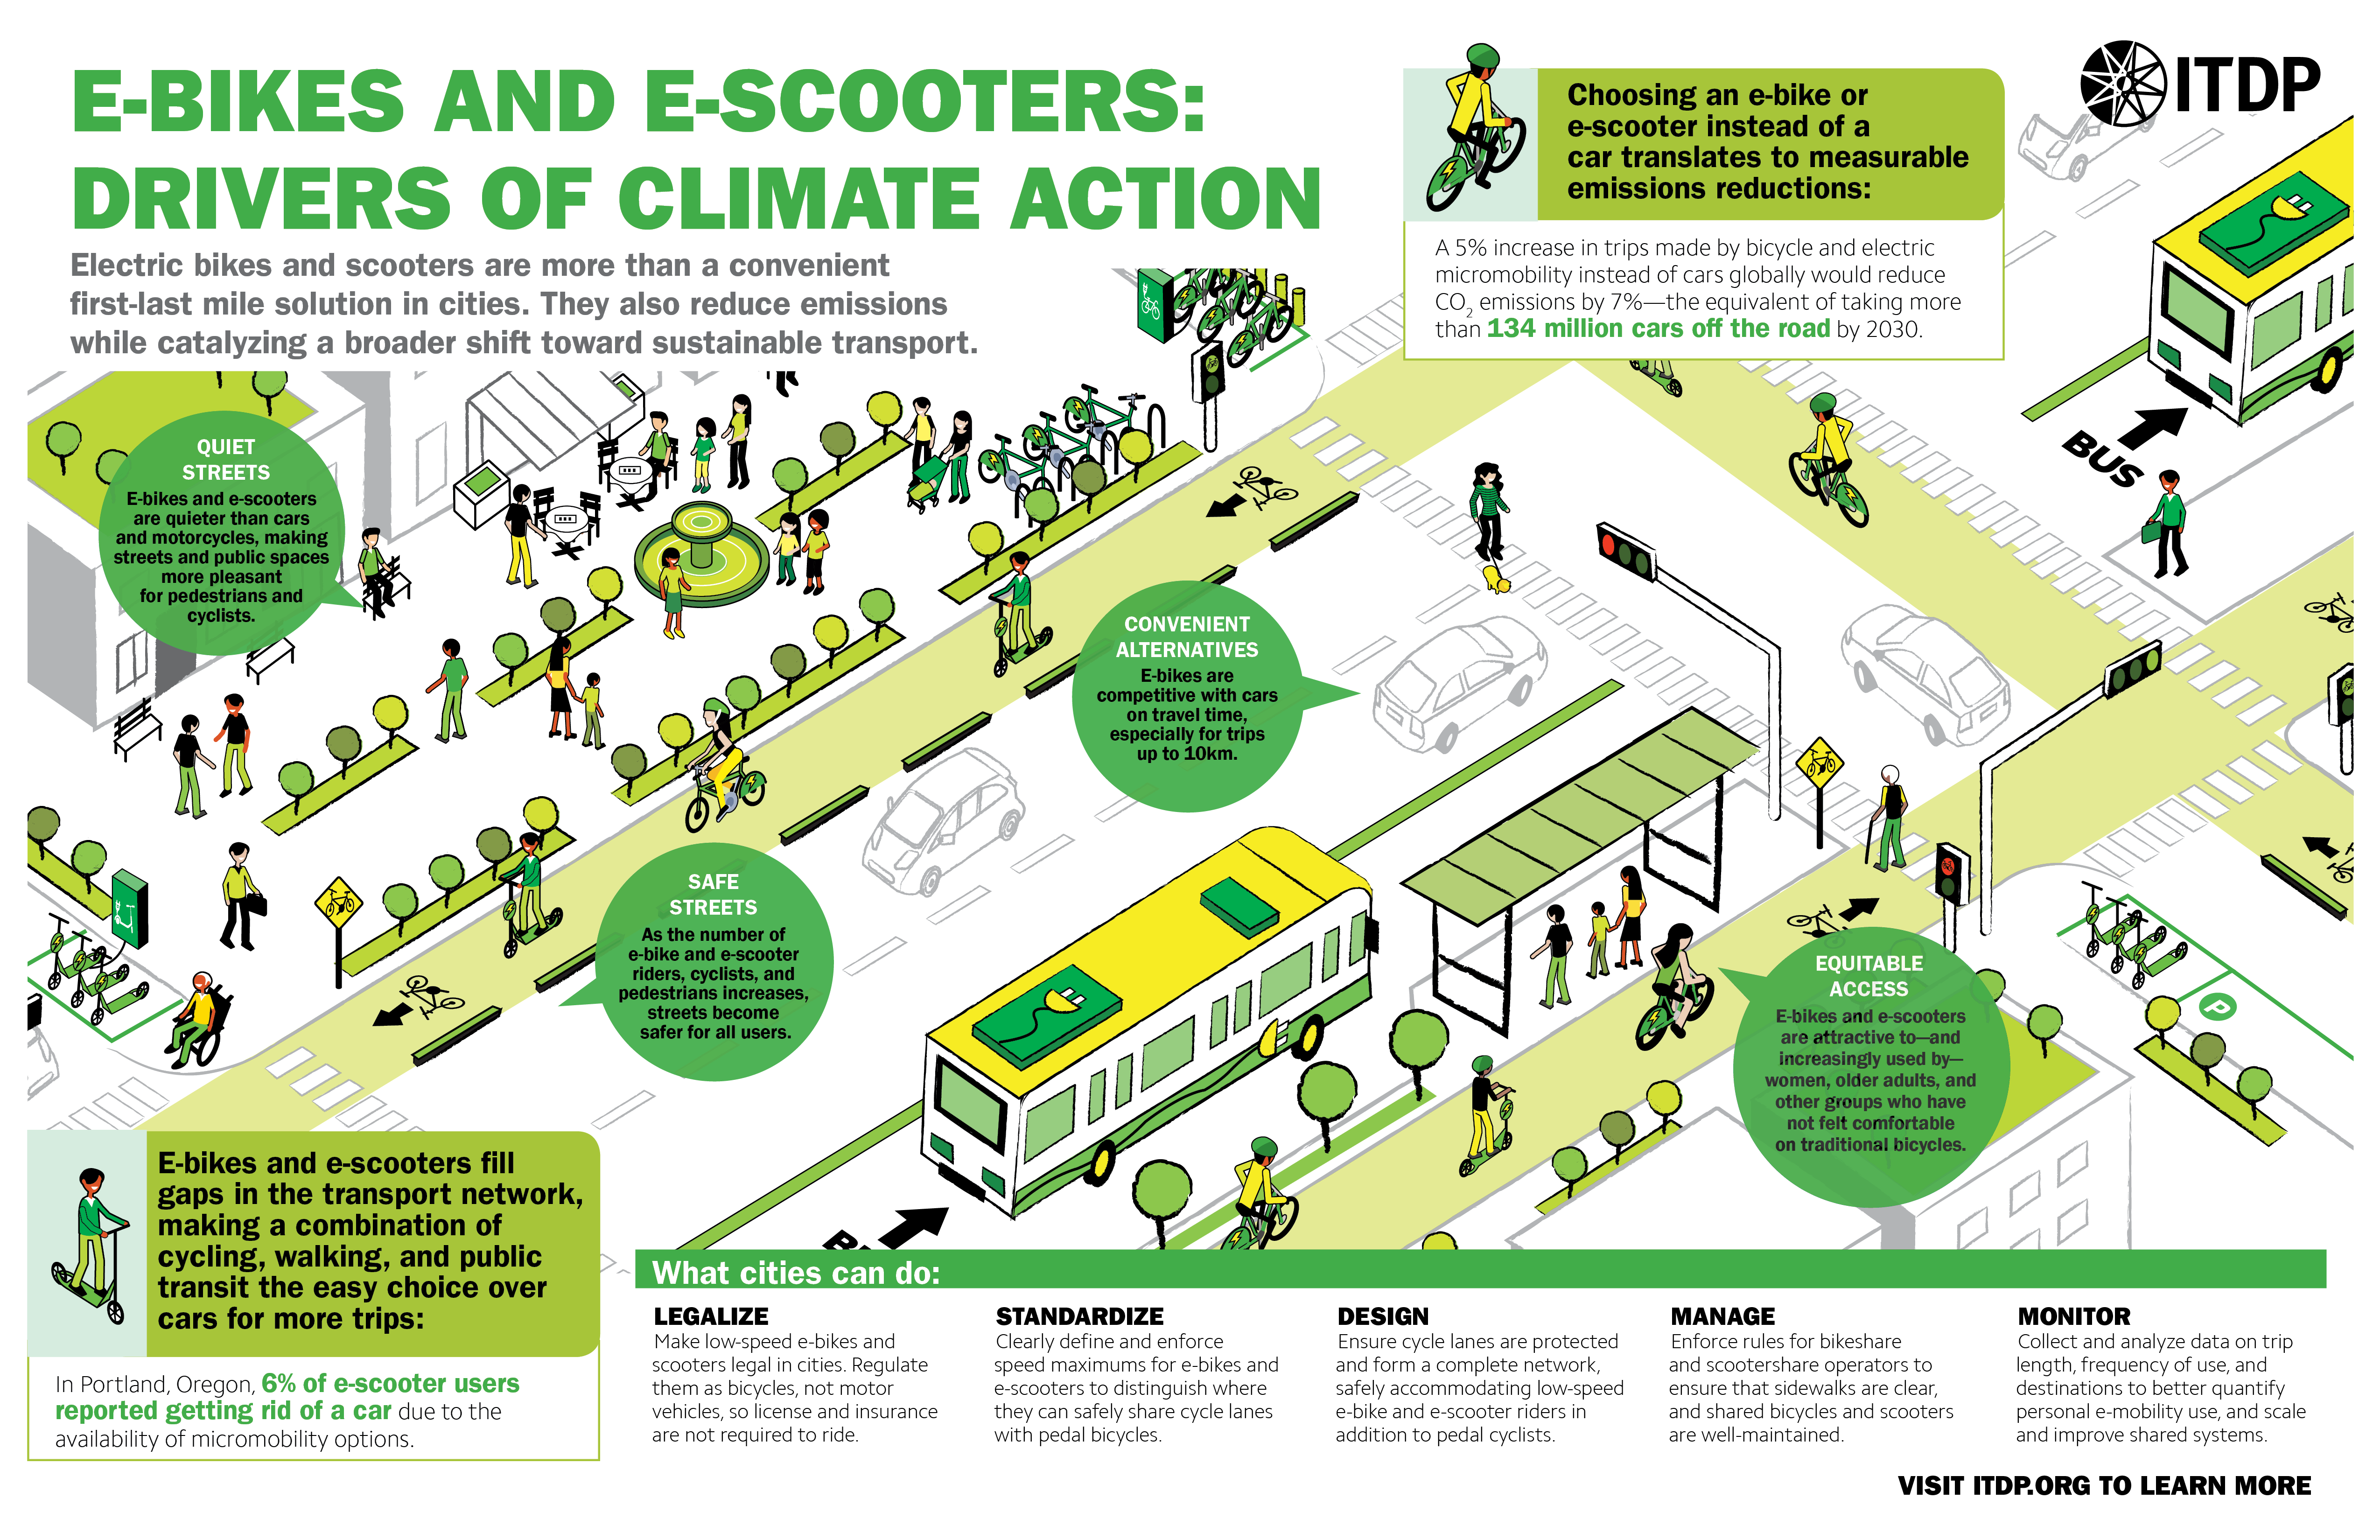 E-Bikes & Drivers Climate Action - Institute for and Development